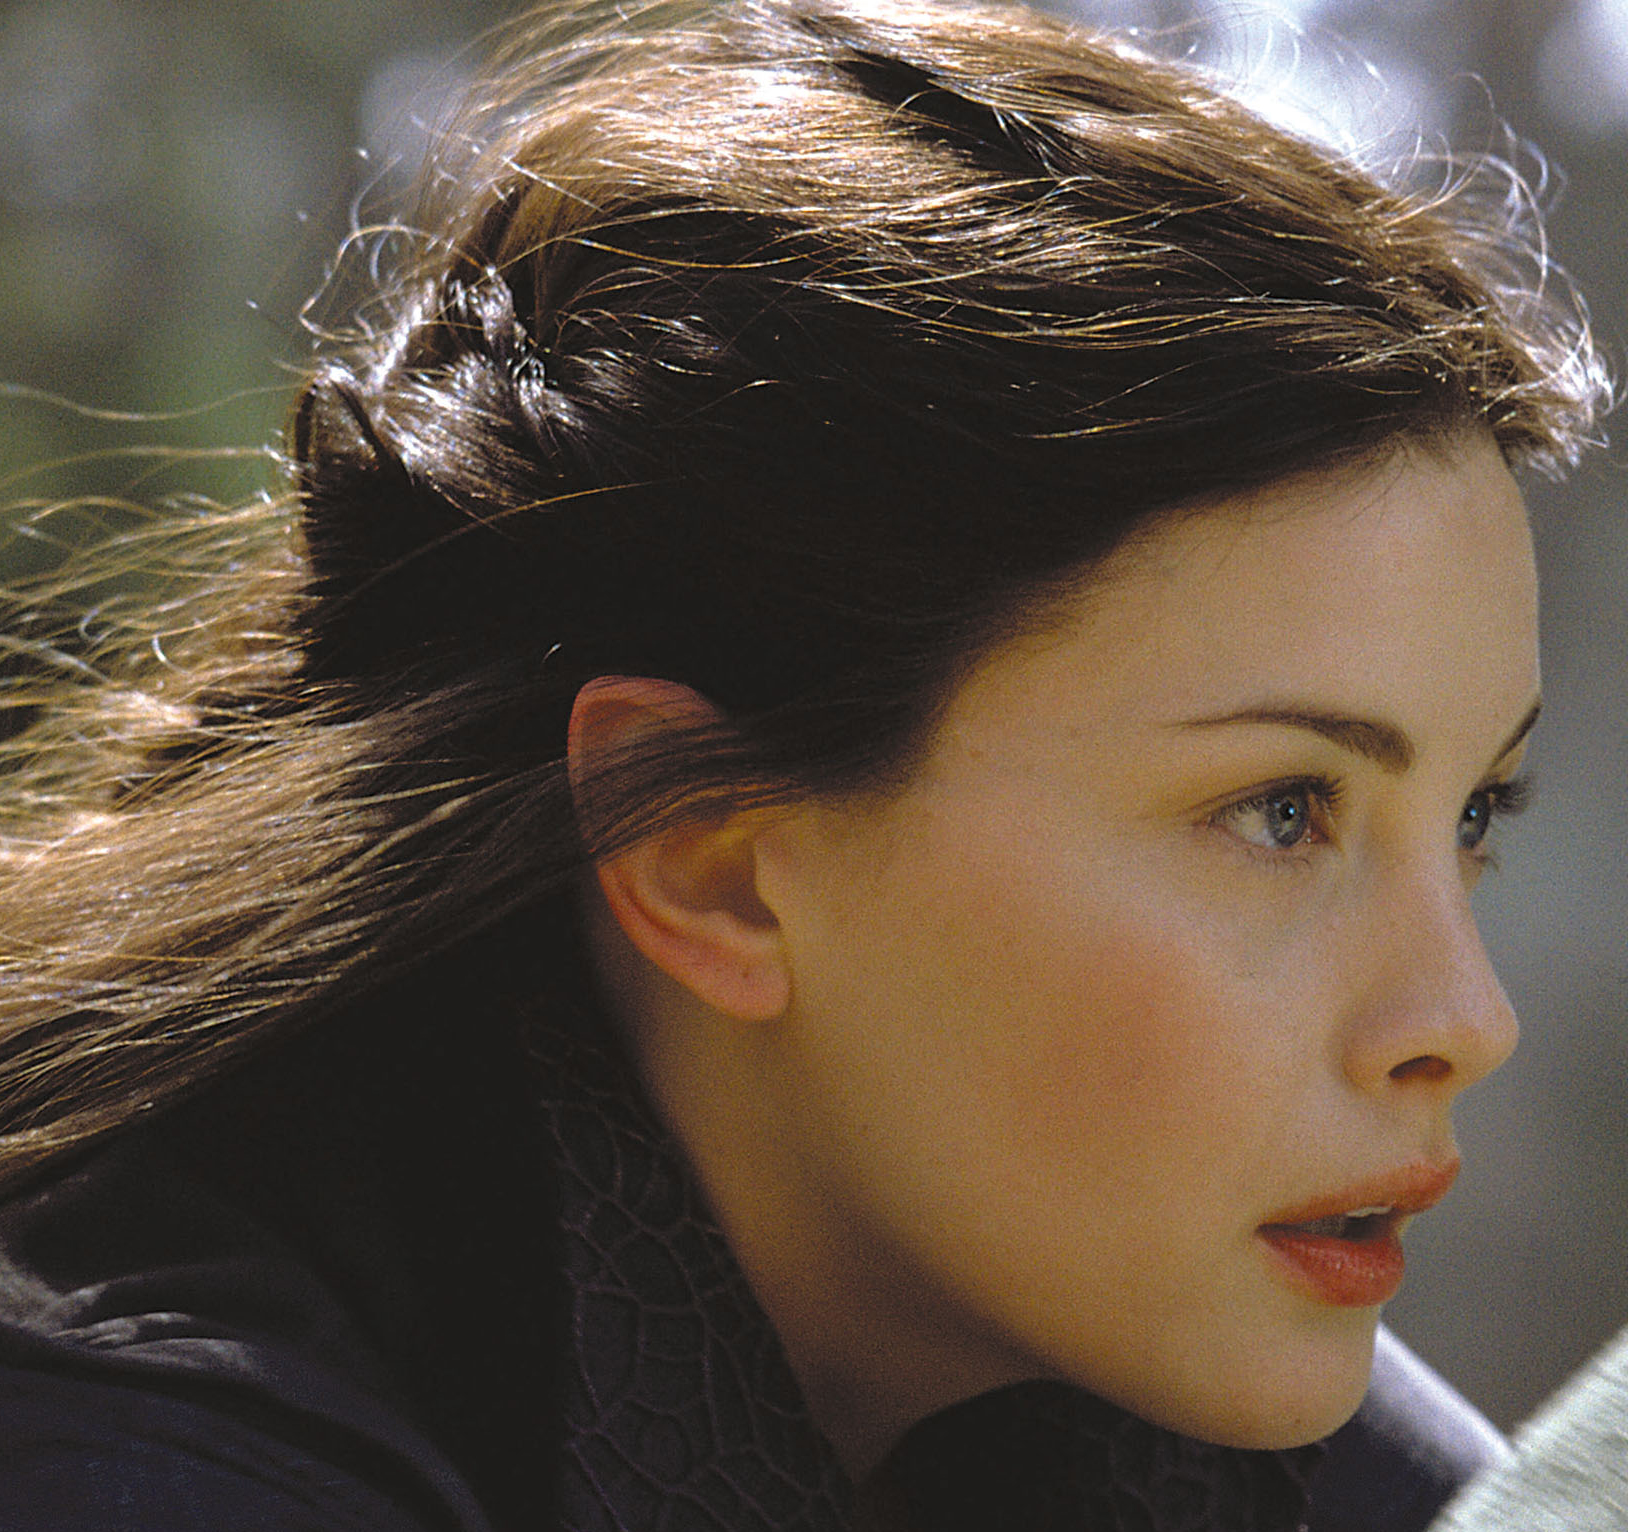 Arwen, Lord of the Rings  Always wanted to look like her!